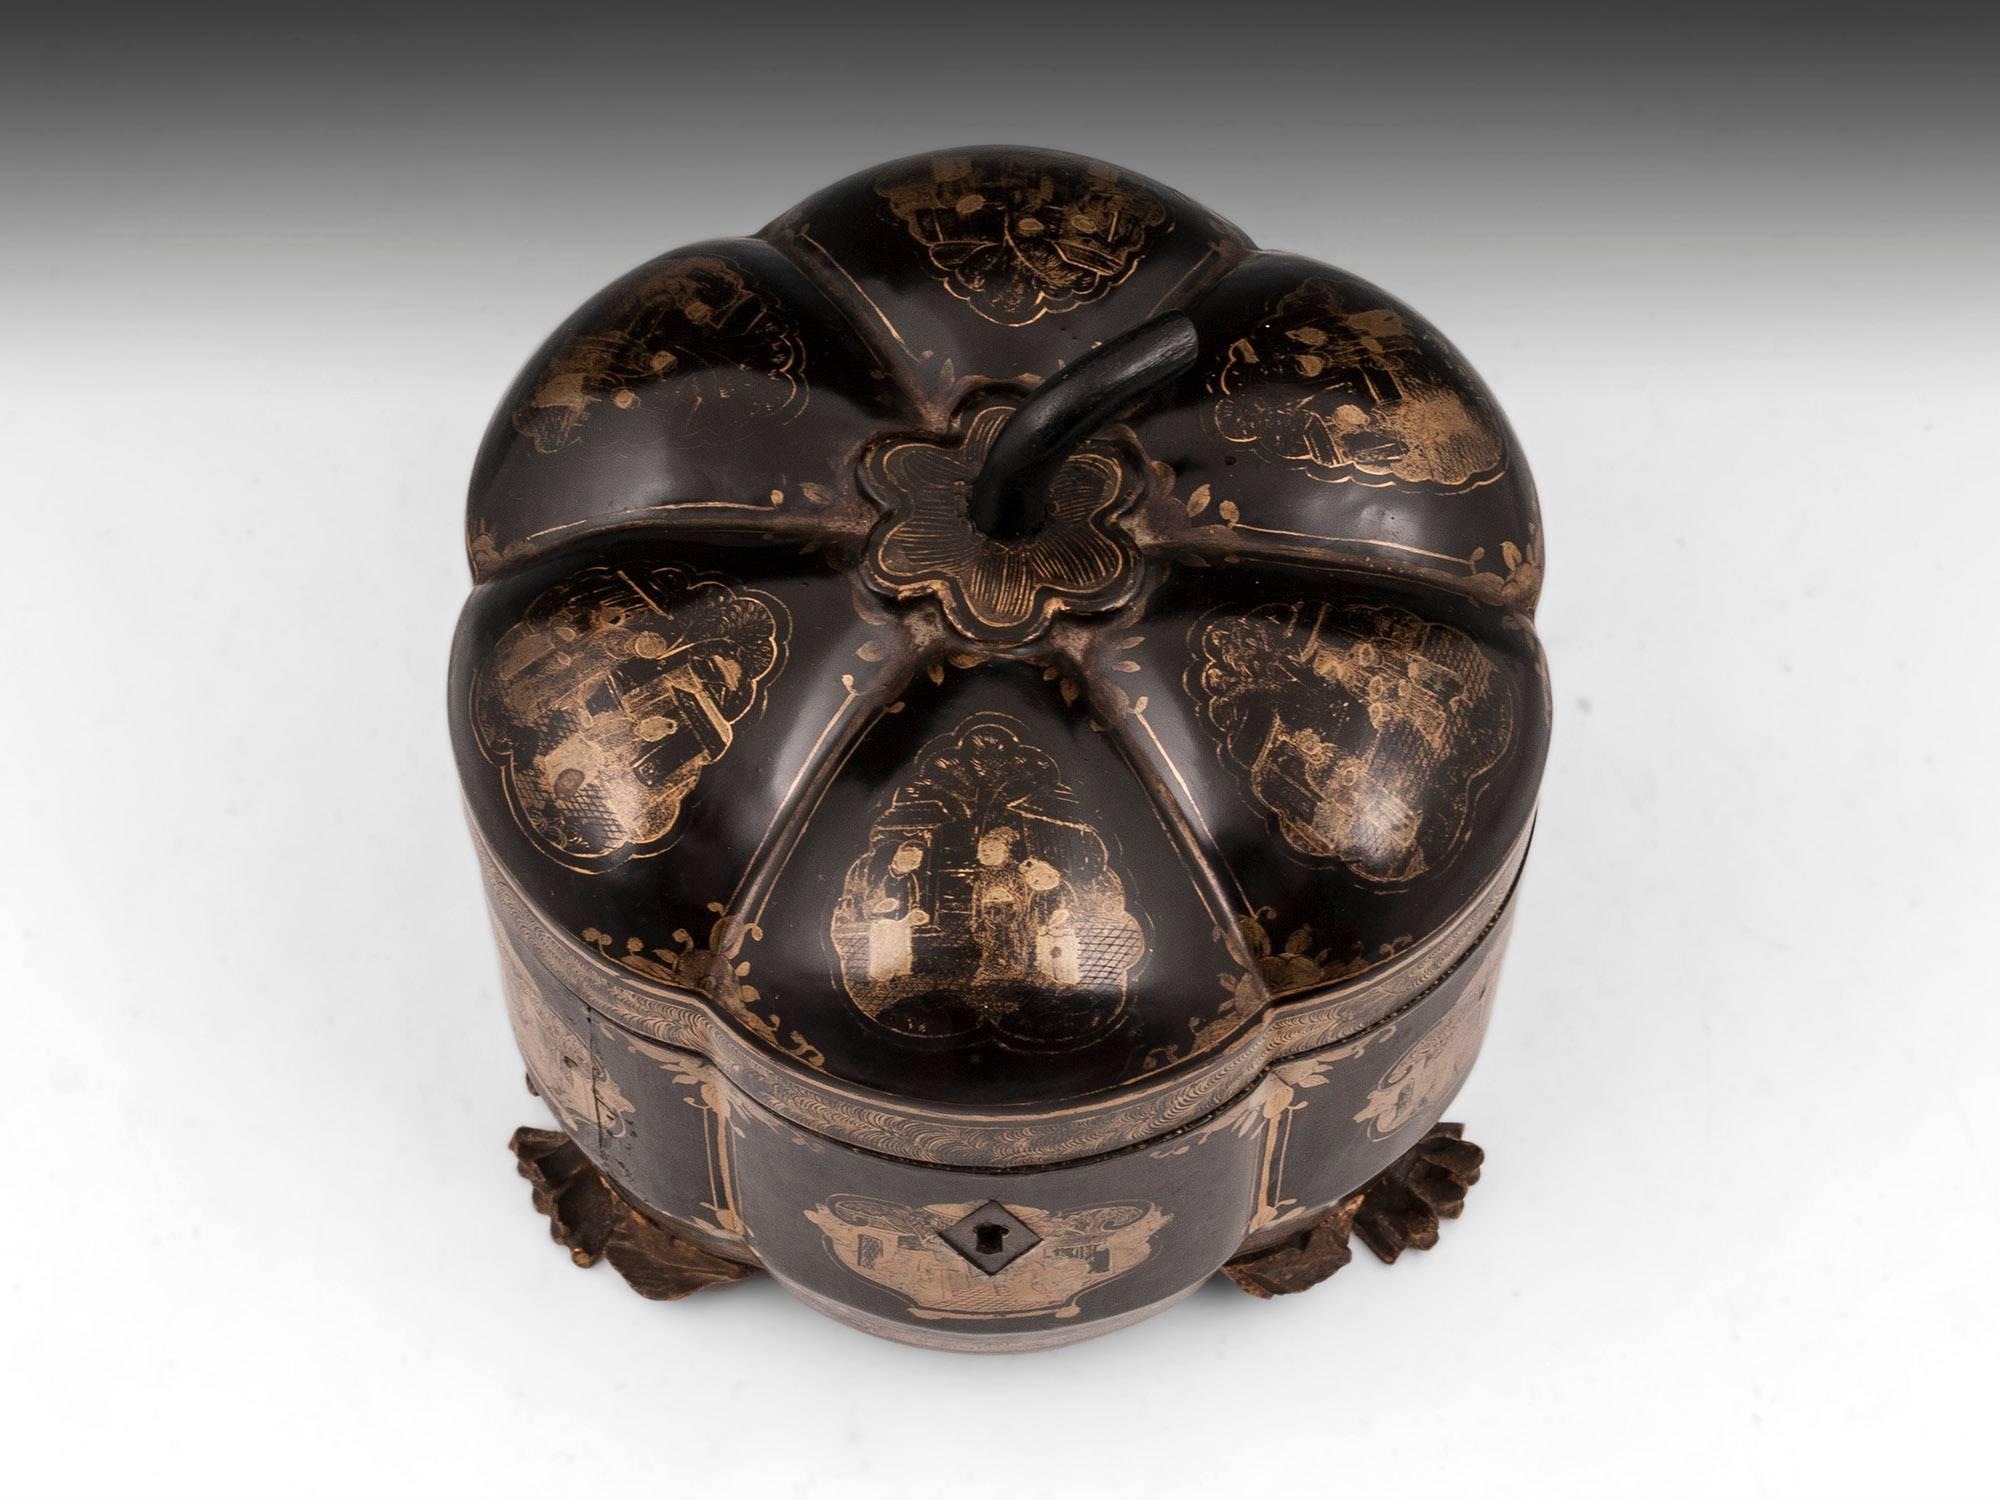 Chinese lacquer melon tea chest decorated with chinoiserie scenes in gold, standing on three carved dragon’s feet.

The interior of the chinese tea chest houses a engraved paktong tea caddy with bone handled lid.

This Chinese melon tea chest